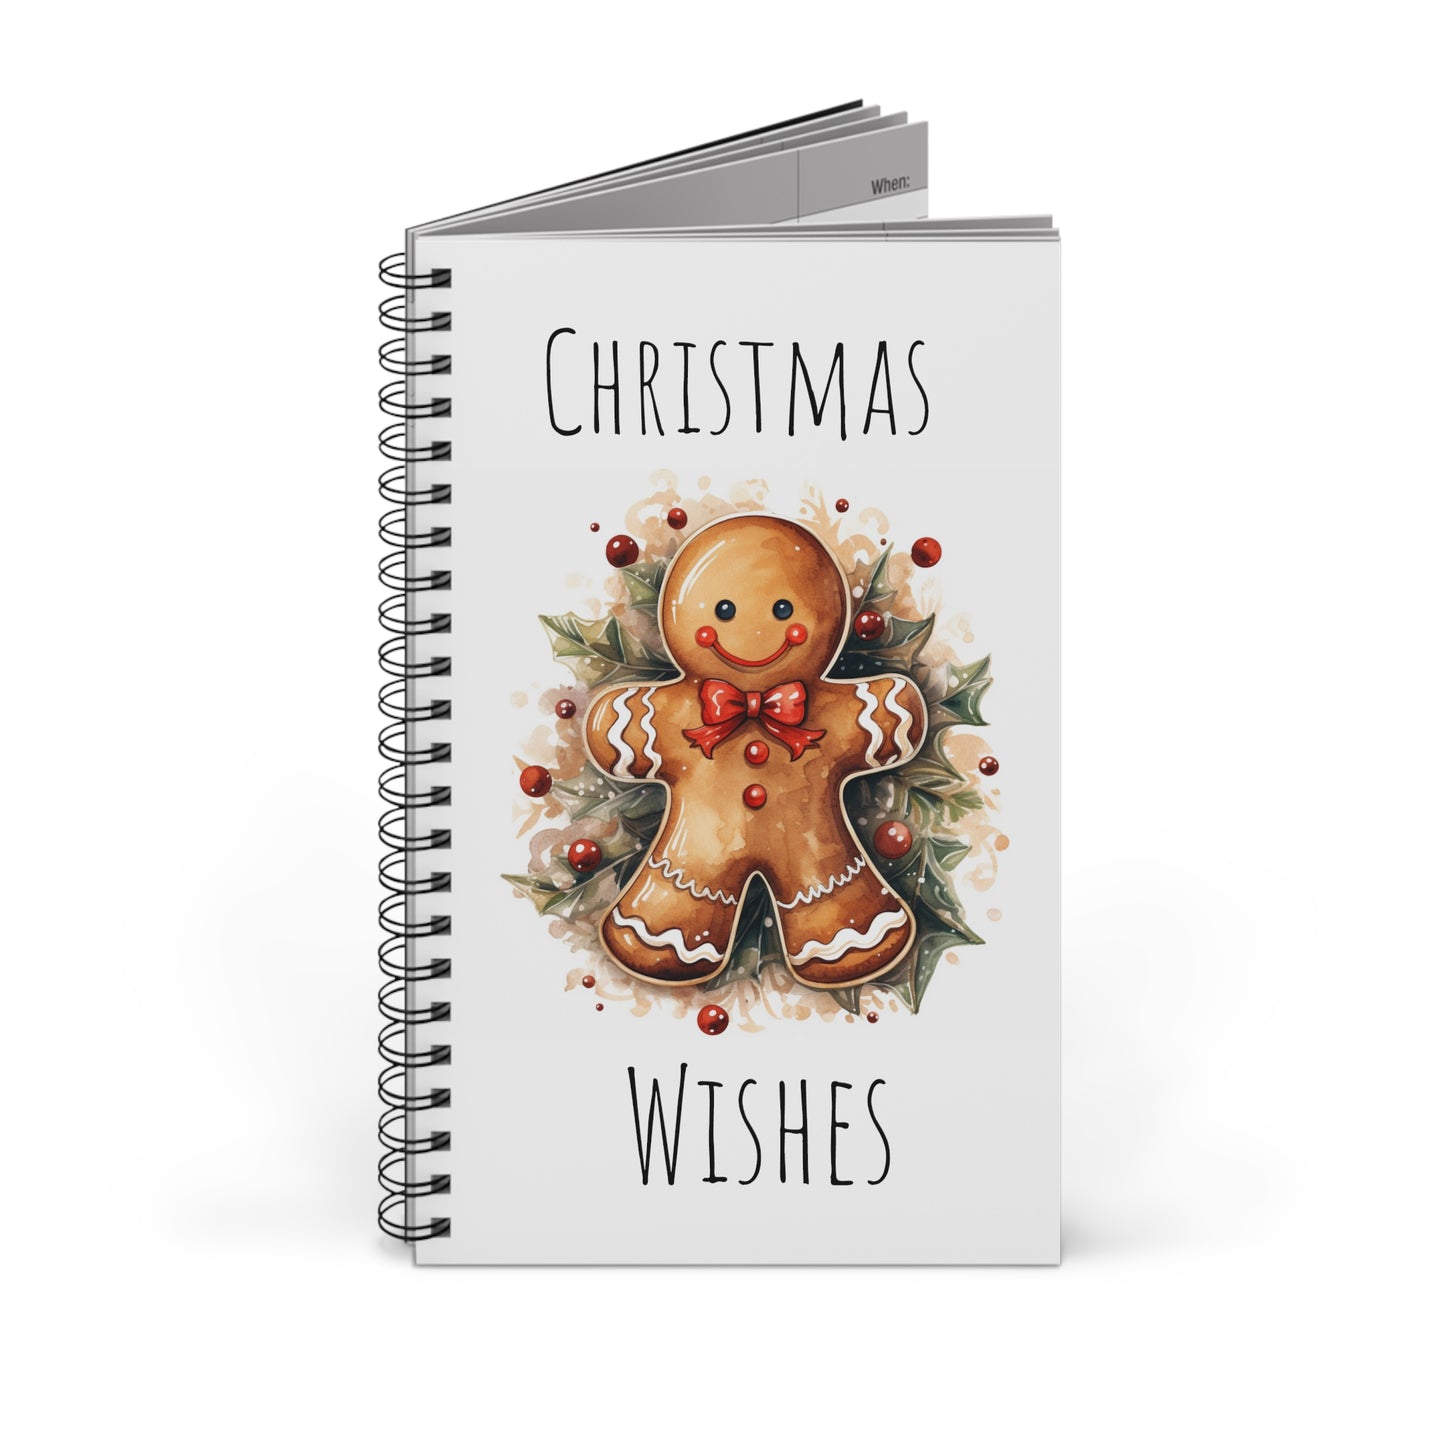 Christmas Wishes Spiral Journal